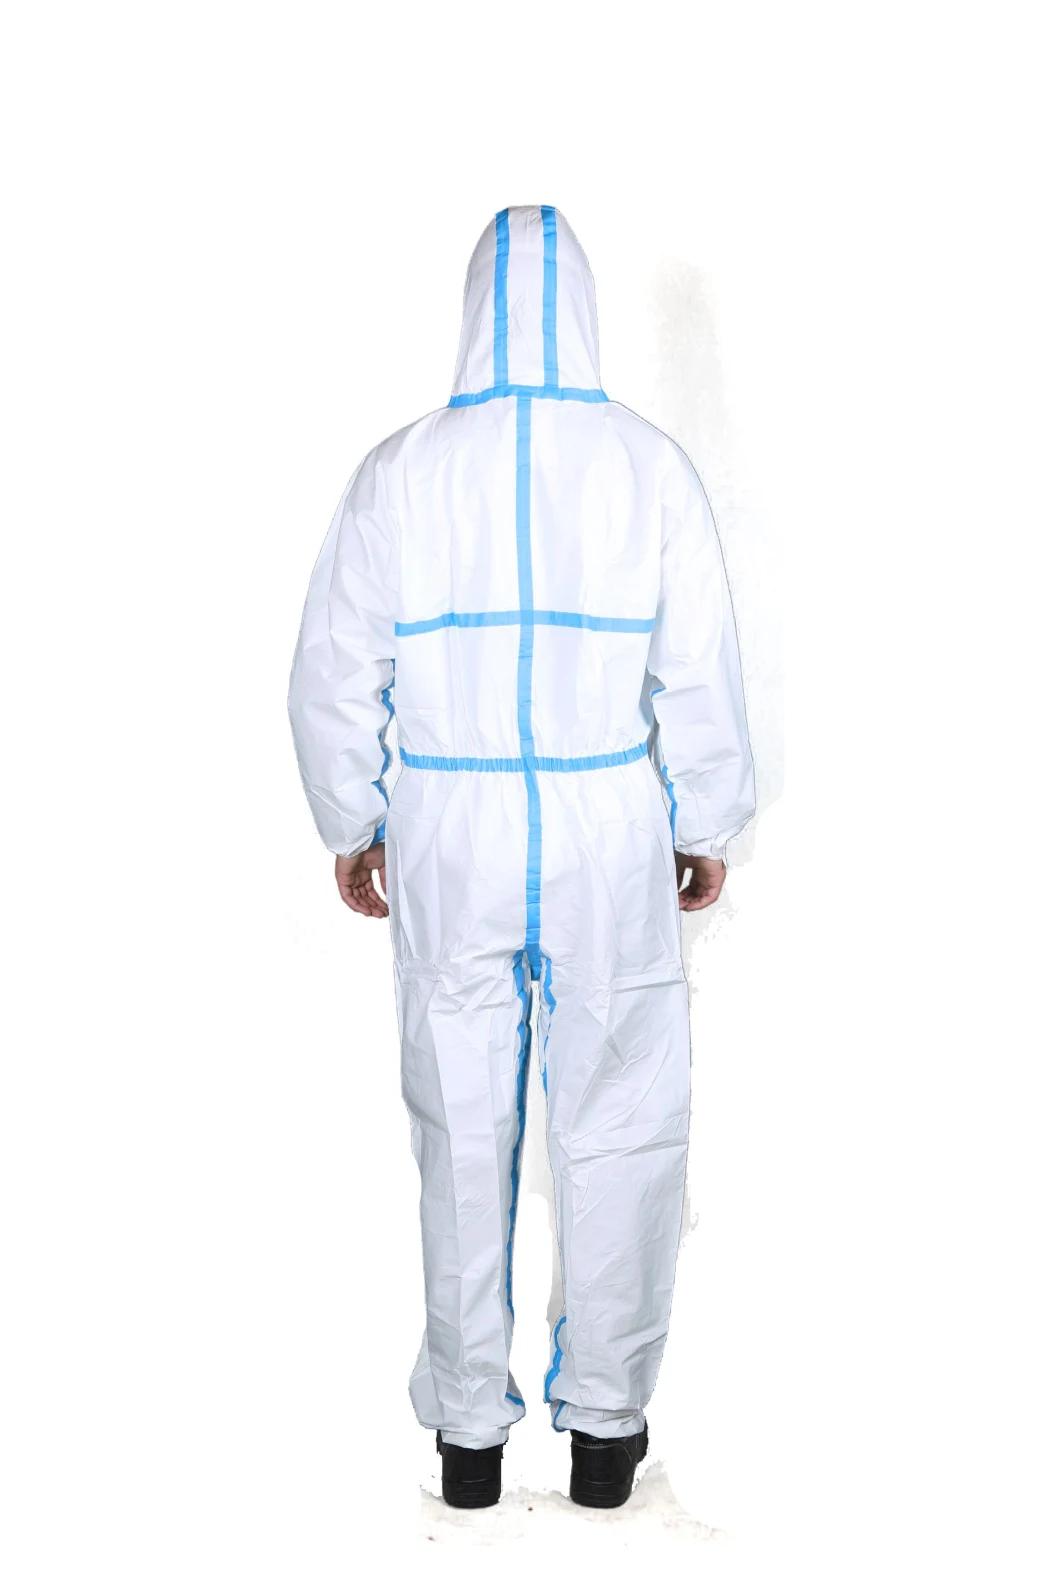 Anti-Virus PP/Non Woven /SMS Disposable Safety Suit Protective Clothing